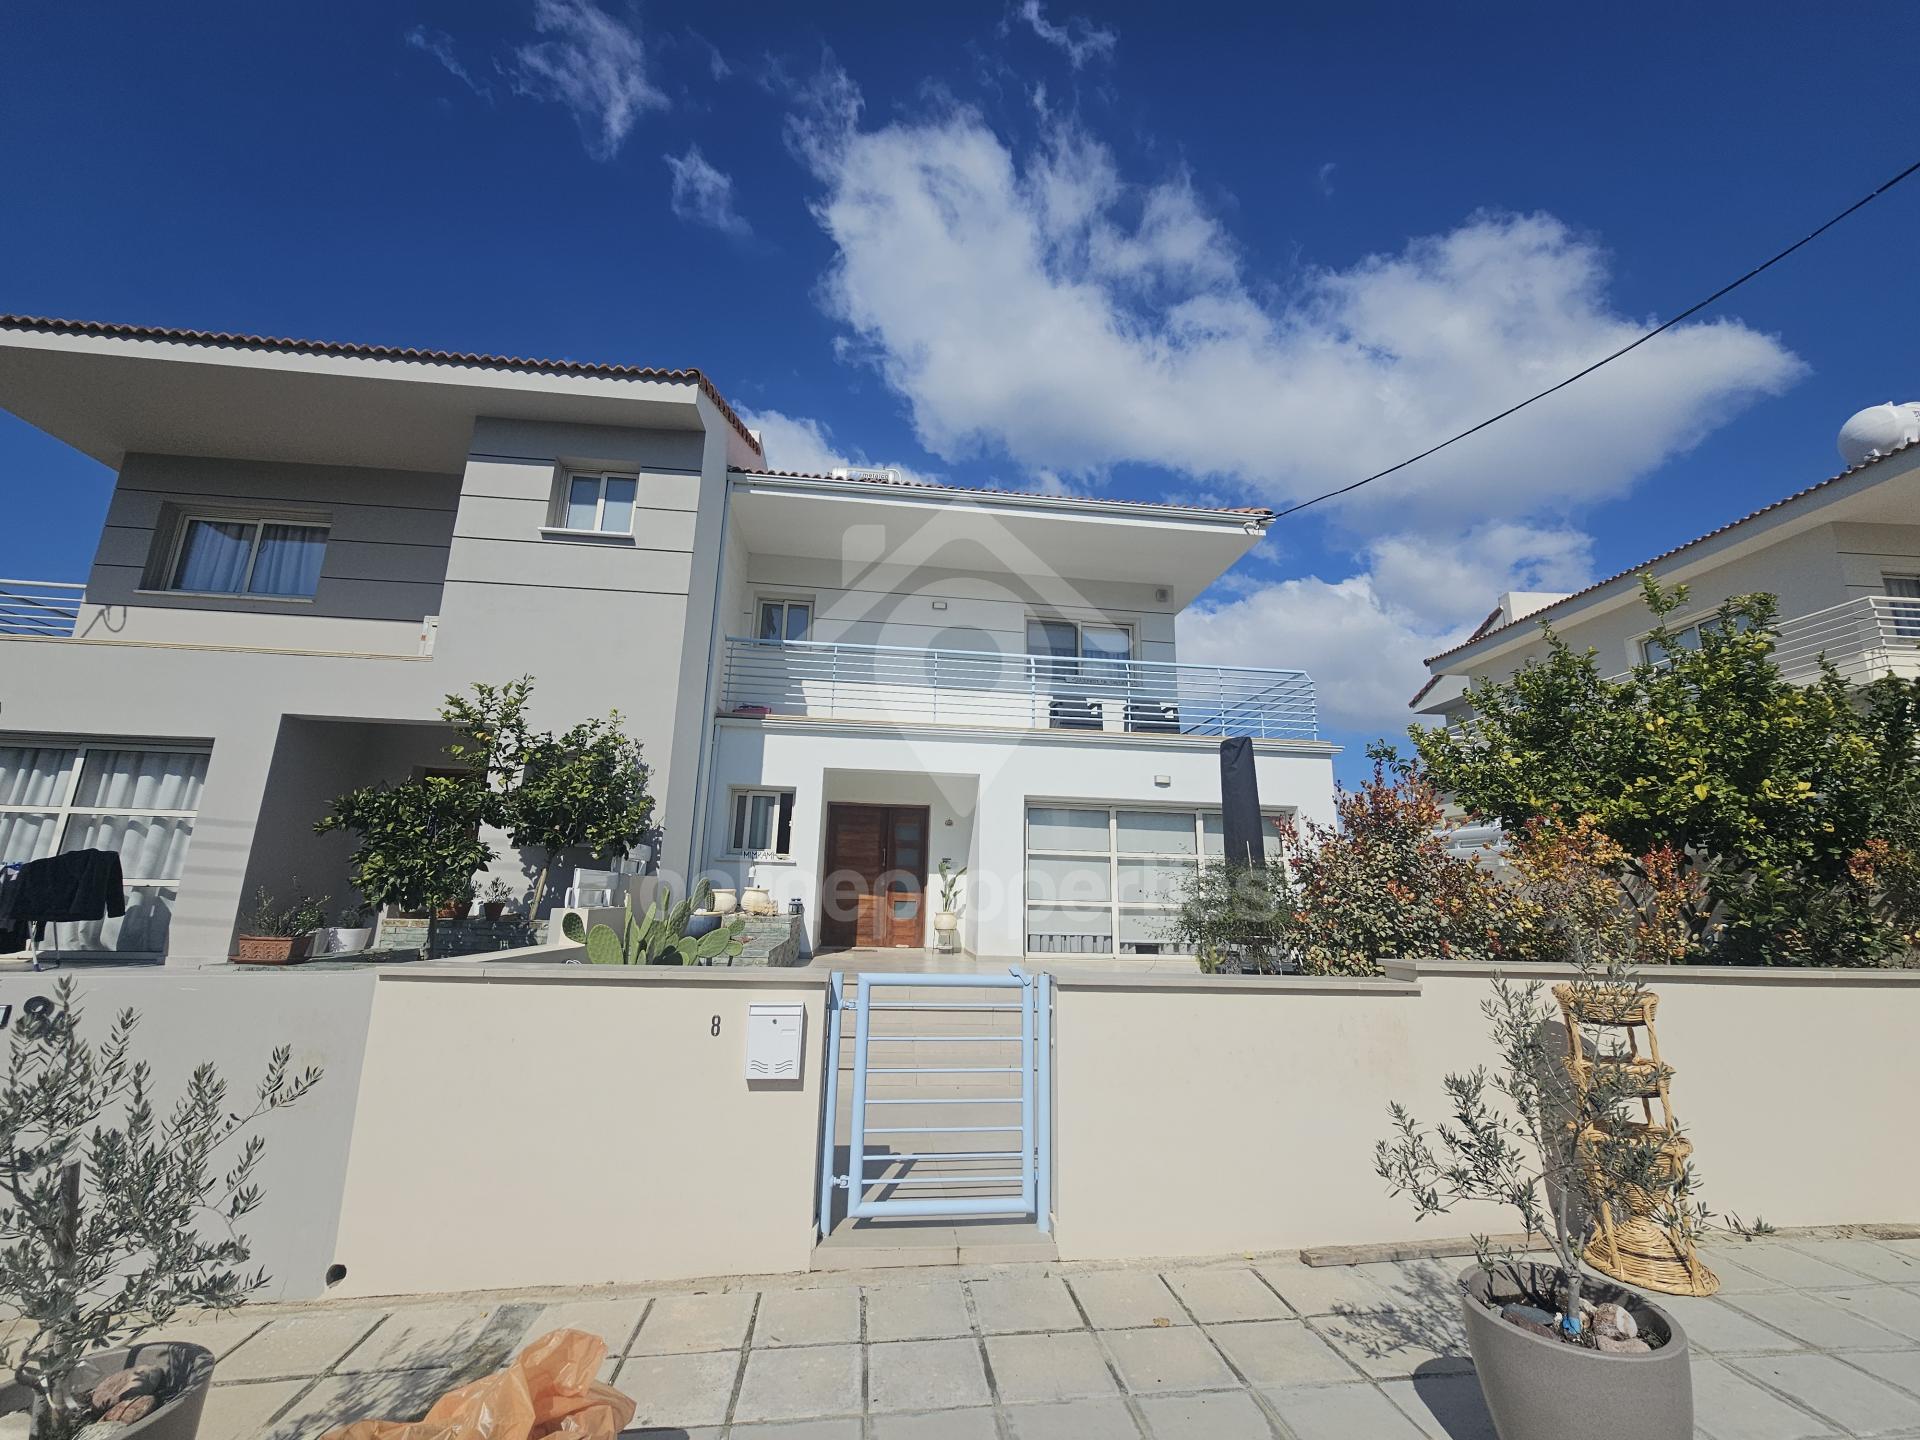 Semi detached house in Strovolos GSP area